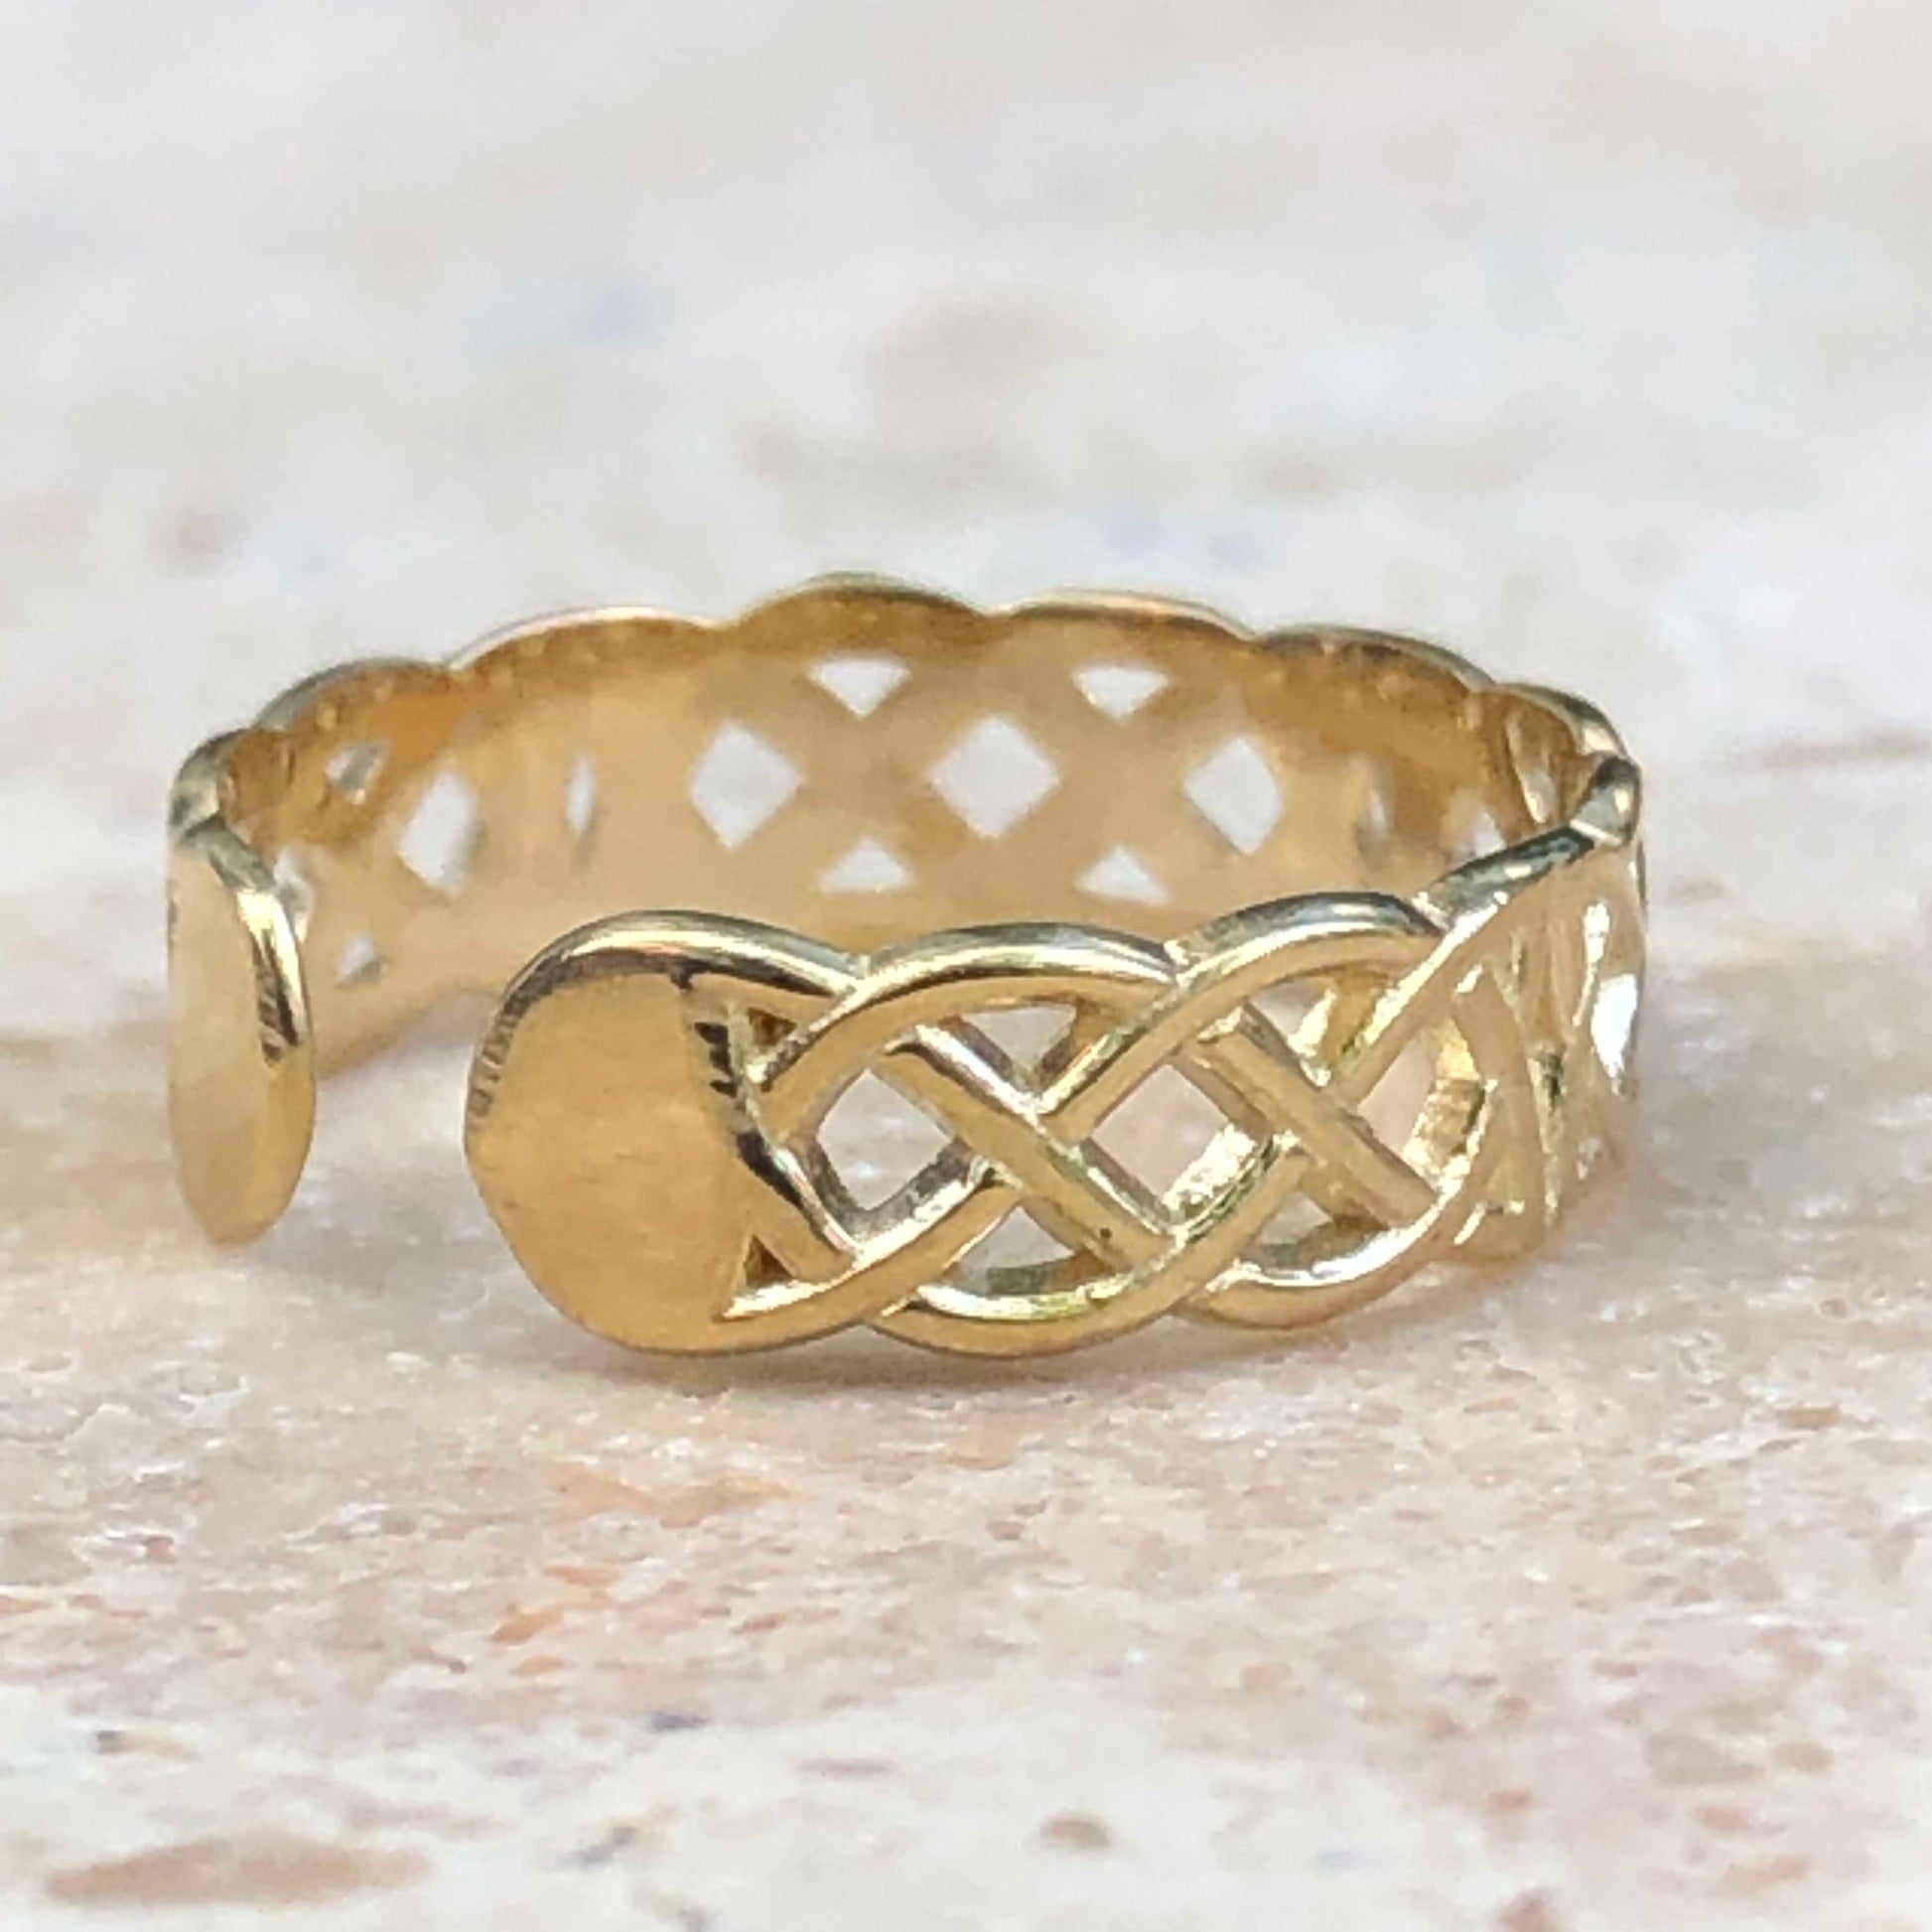 14KT Yellow Gold Celtic Weave Toe Ring, 14KT Yellow Gold Celtic Weave Toe Ring - Legacy Saint Jewelry